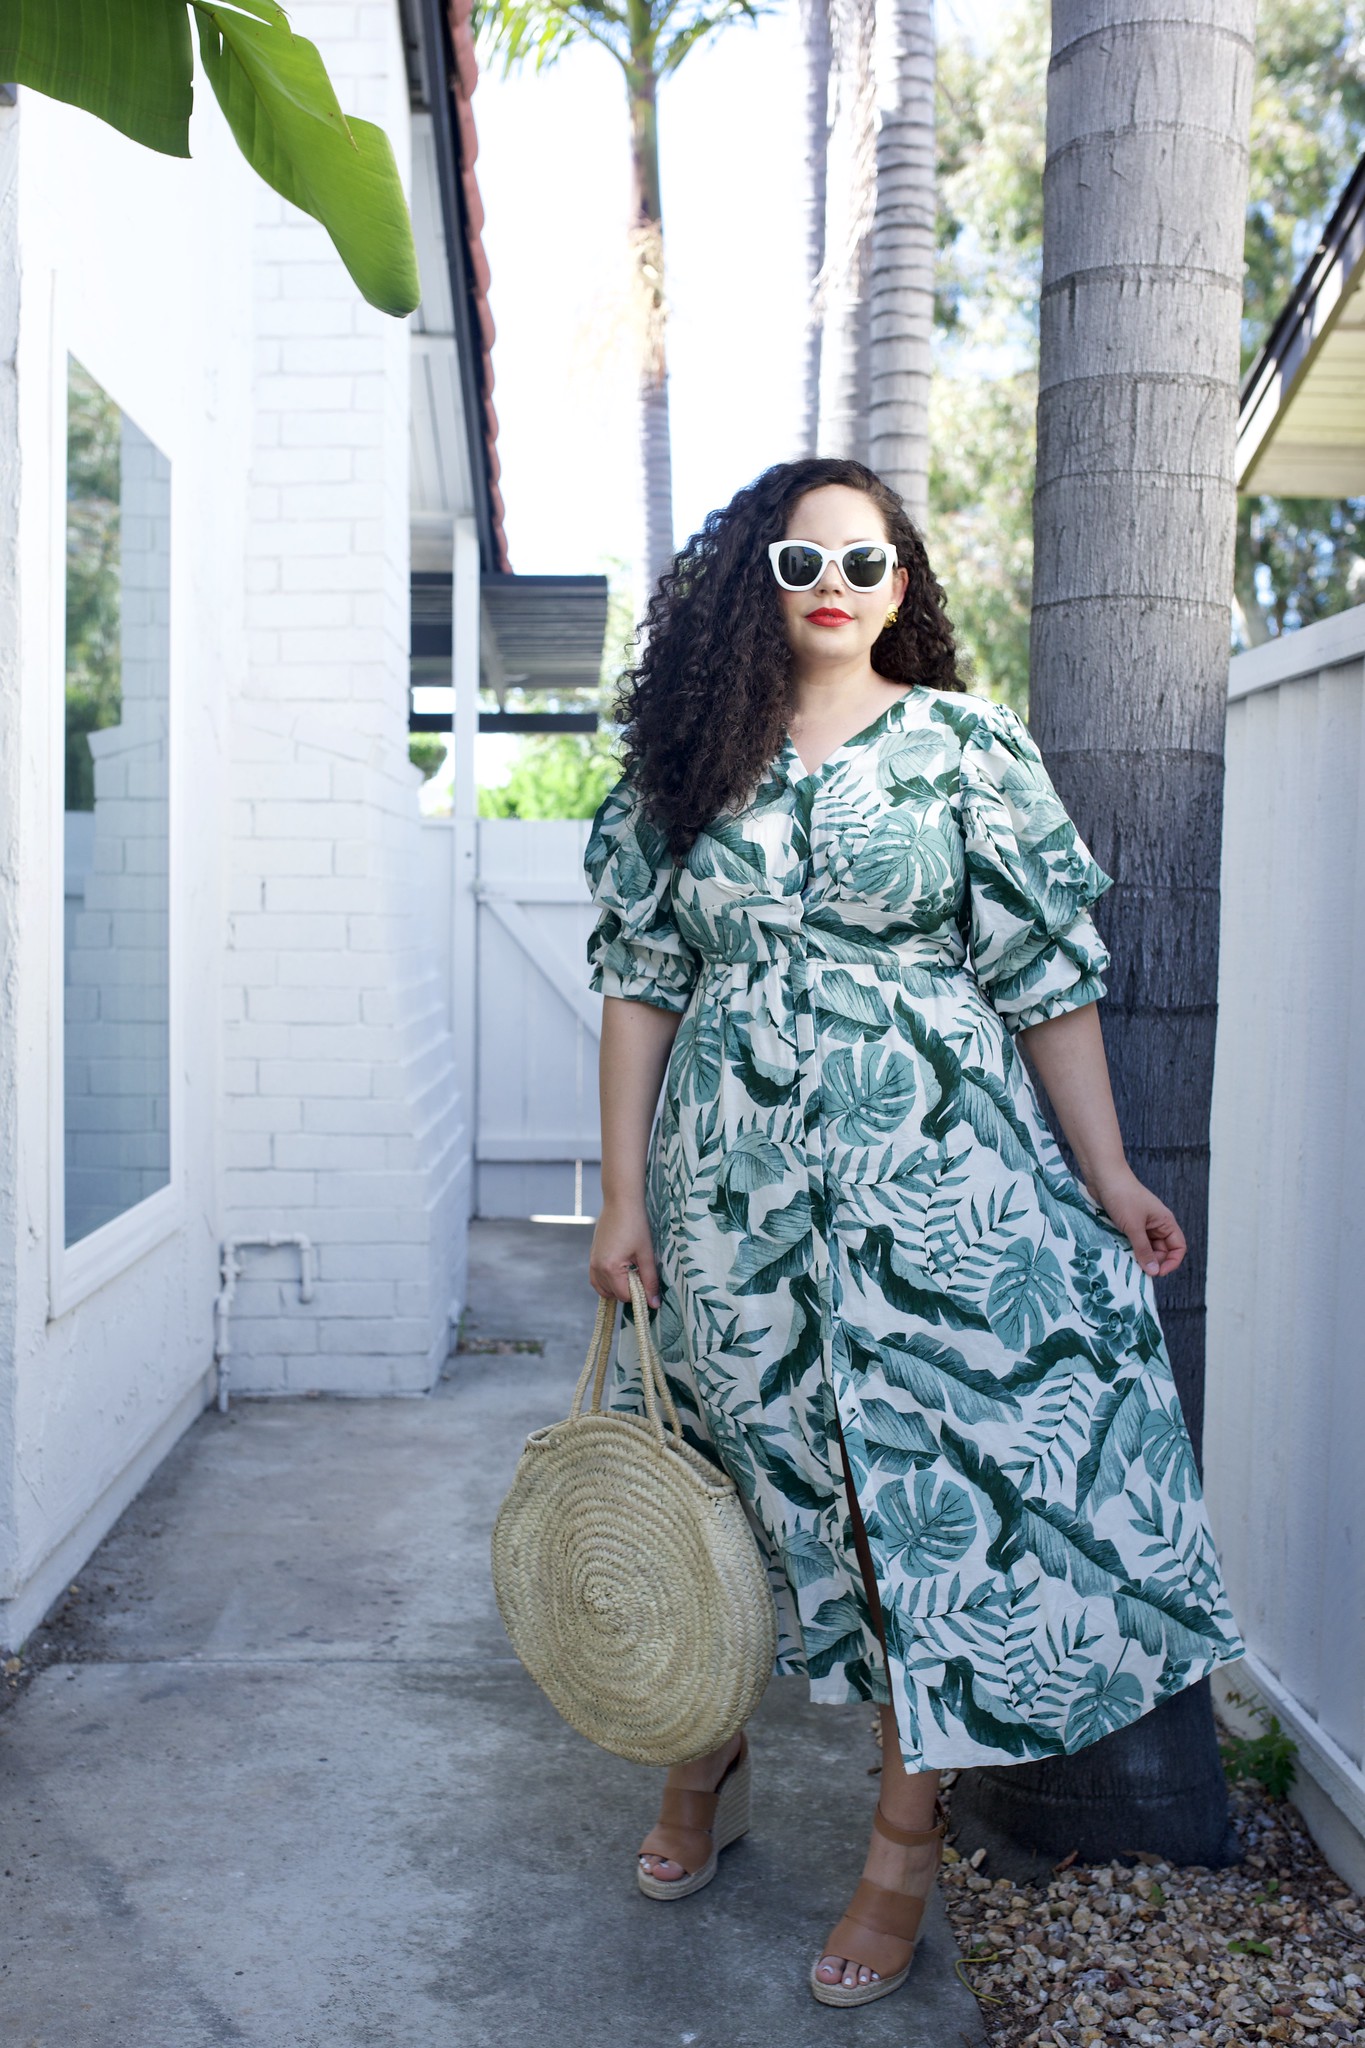 Bored of Florals? Try Leaf Print Instead | Girl With Curves